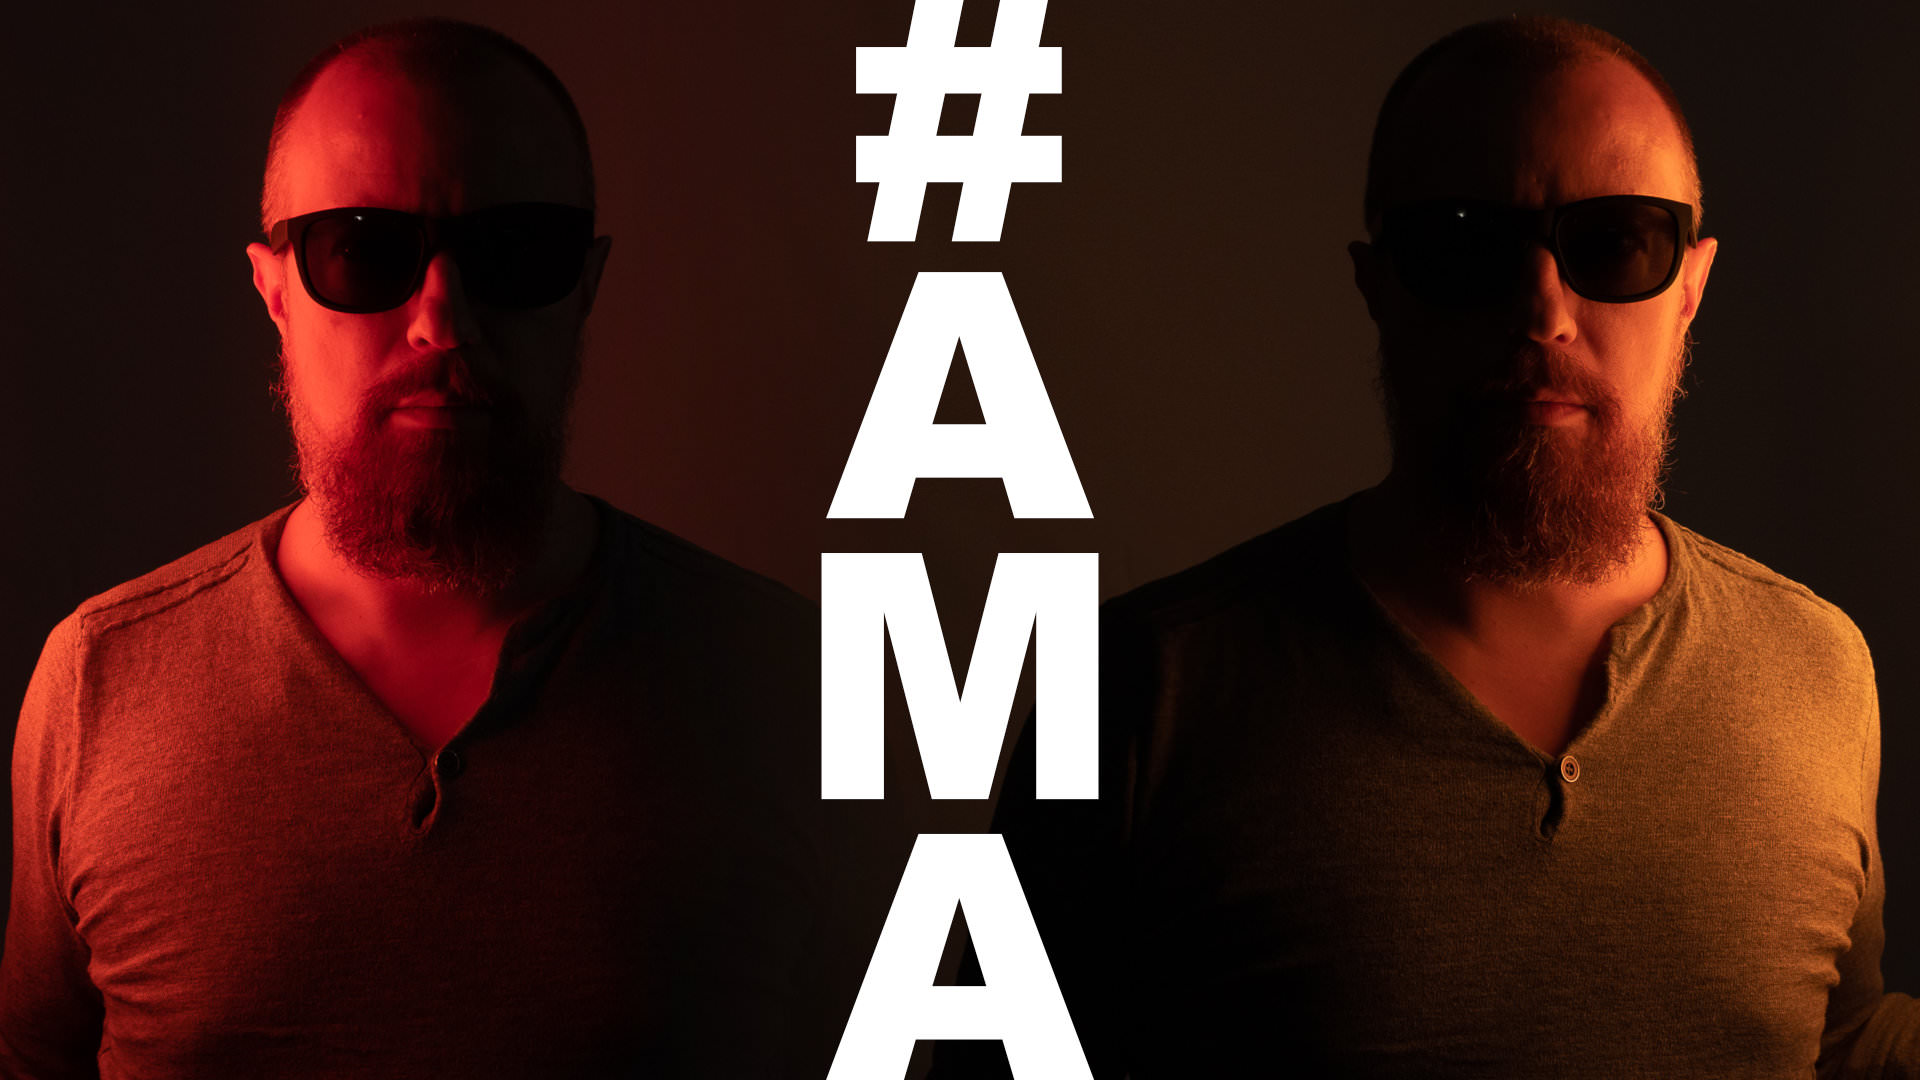 It was an #AMA show…